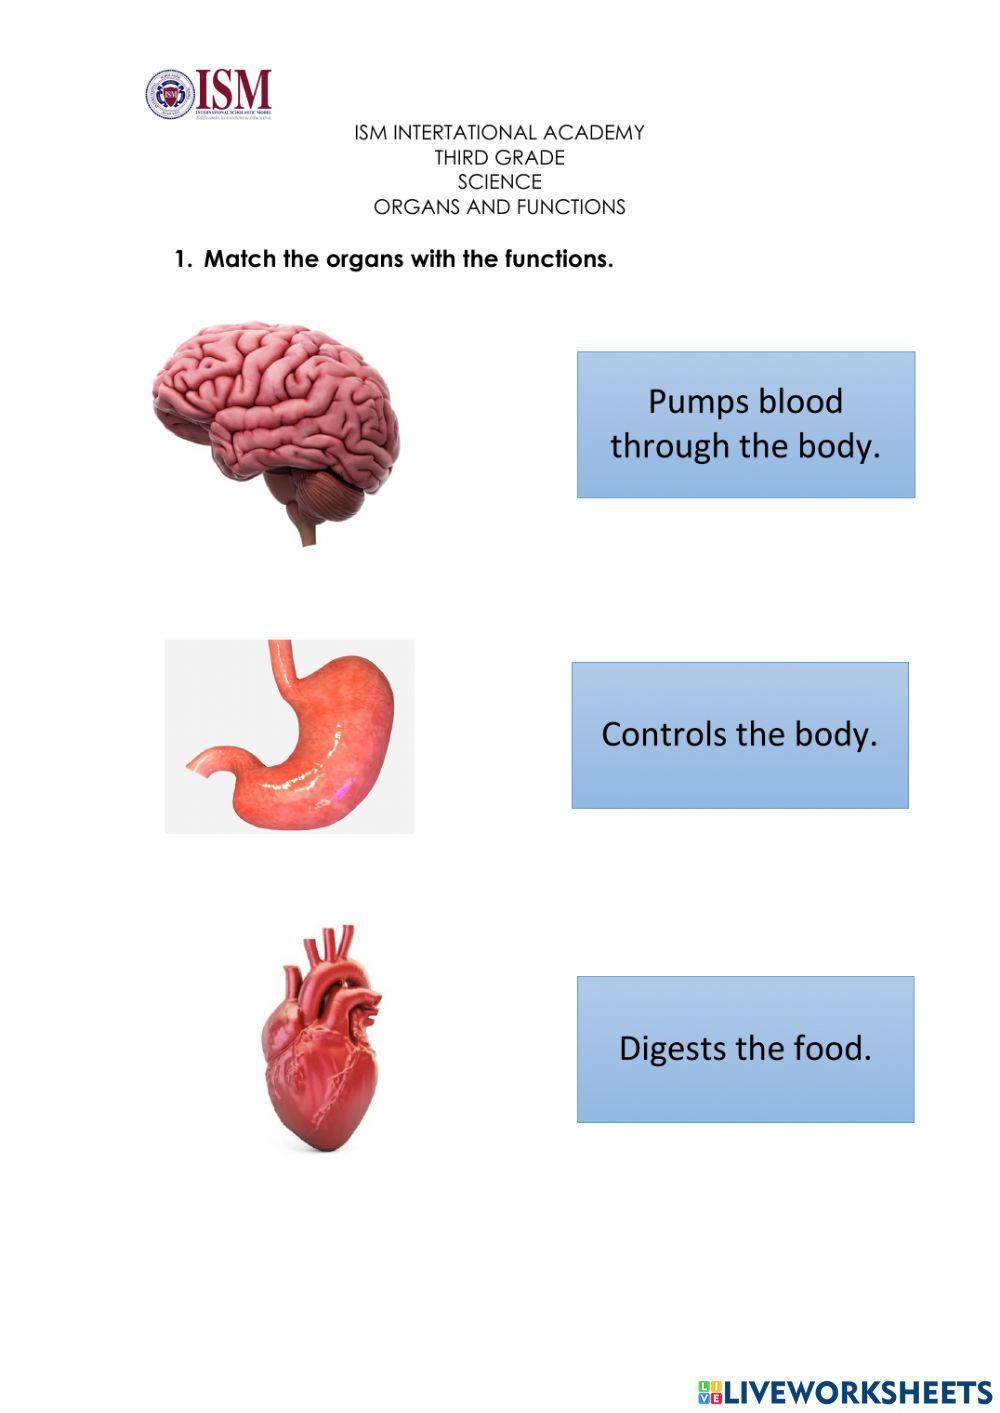 Organs and functions